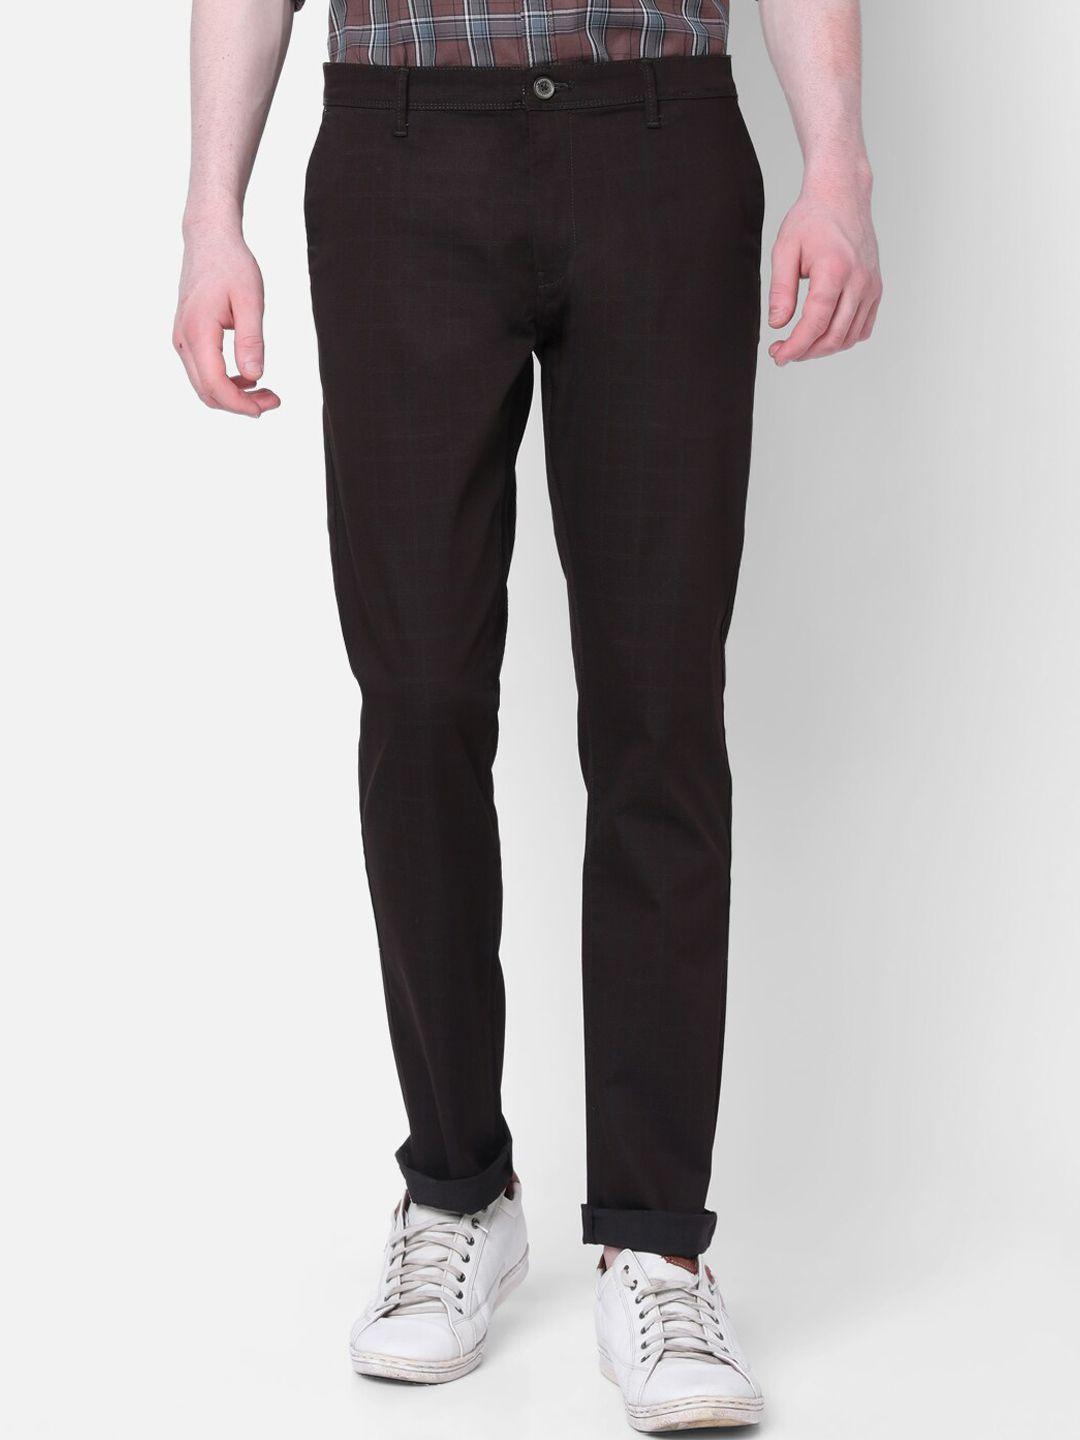 mozzo-men-brown-slim-fit-chinos-trousers